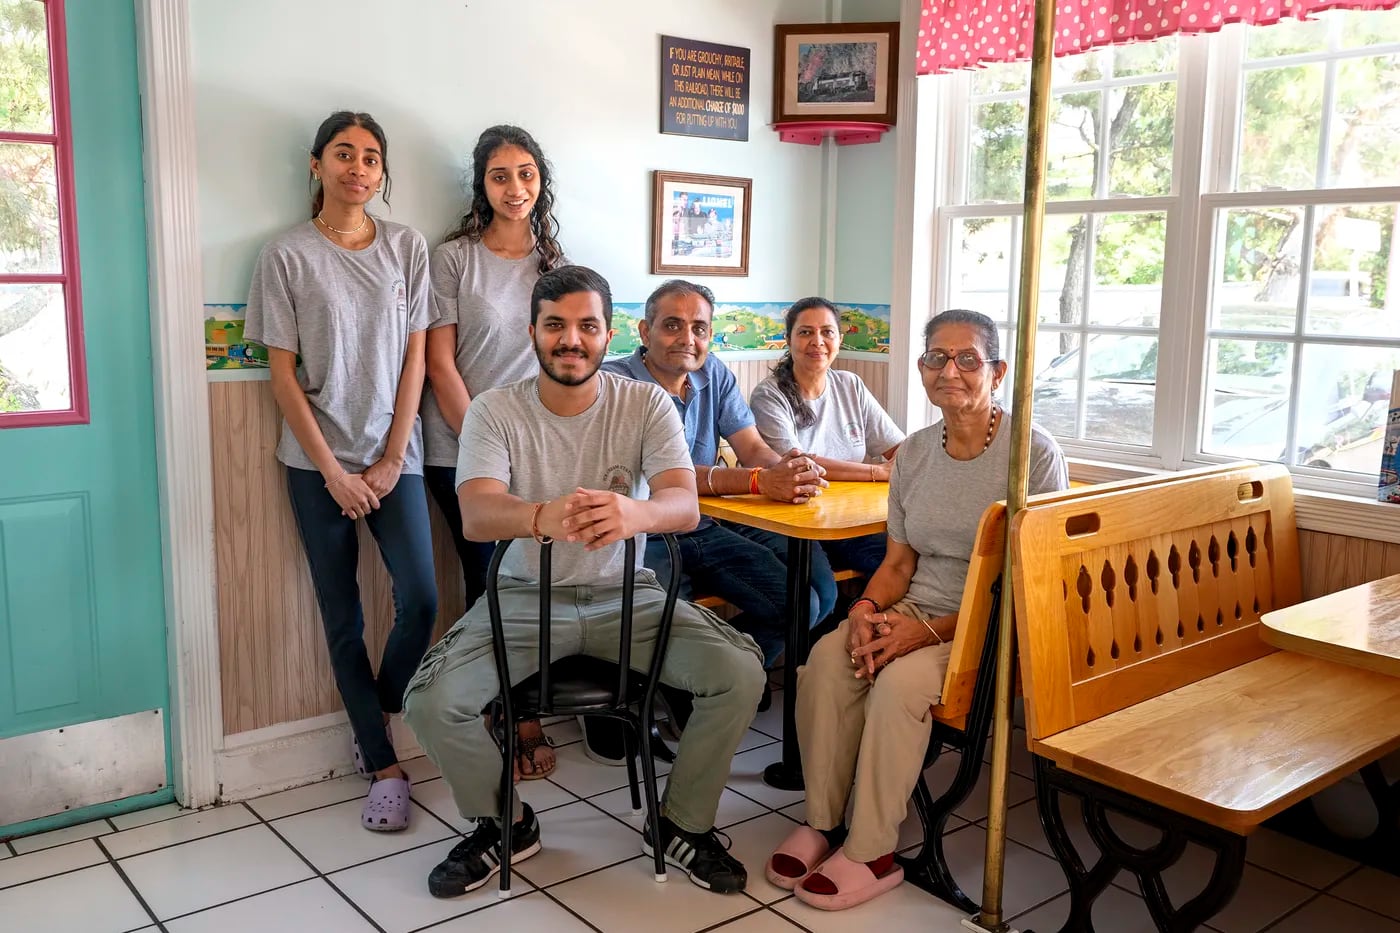 The Patel family at Ice Cream Station. From left are siblings Kesha, 22; Keya, 21; and Jay, 25; their parents, Jack and Sonal Patel; and grandmother, Nita Patel.